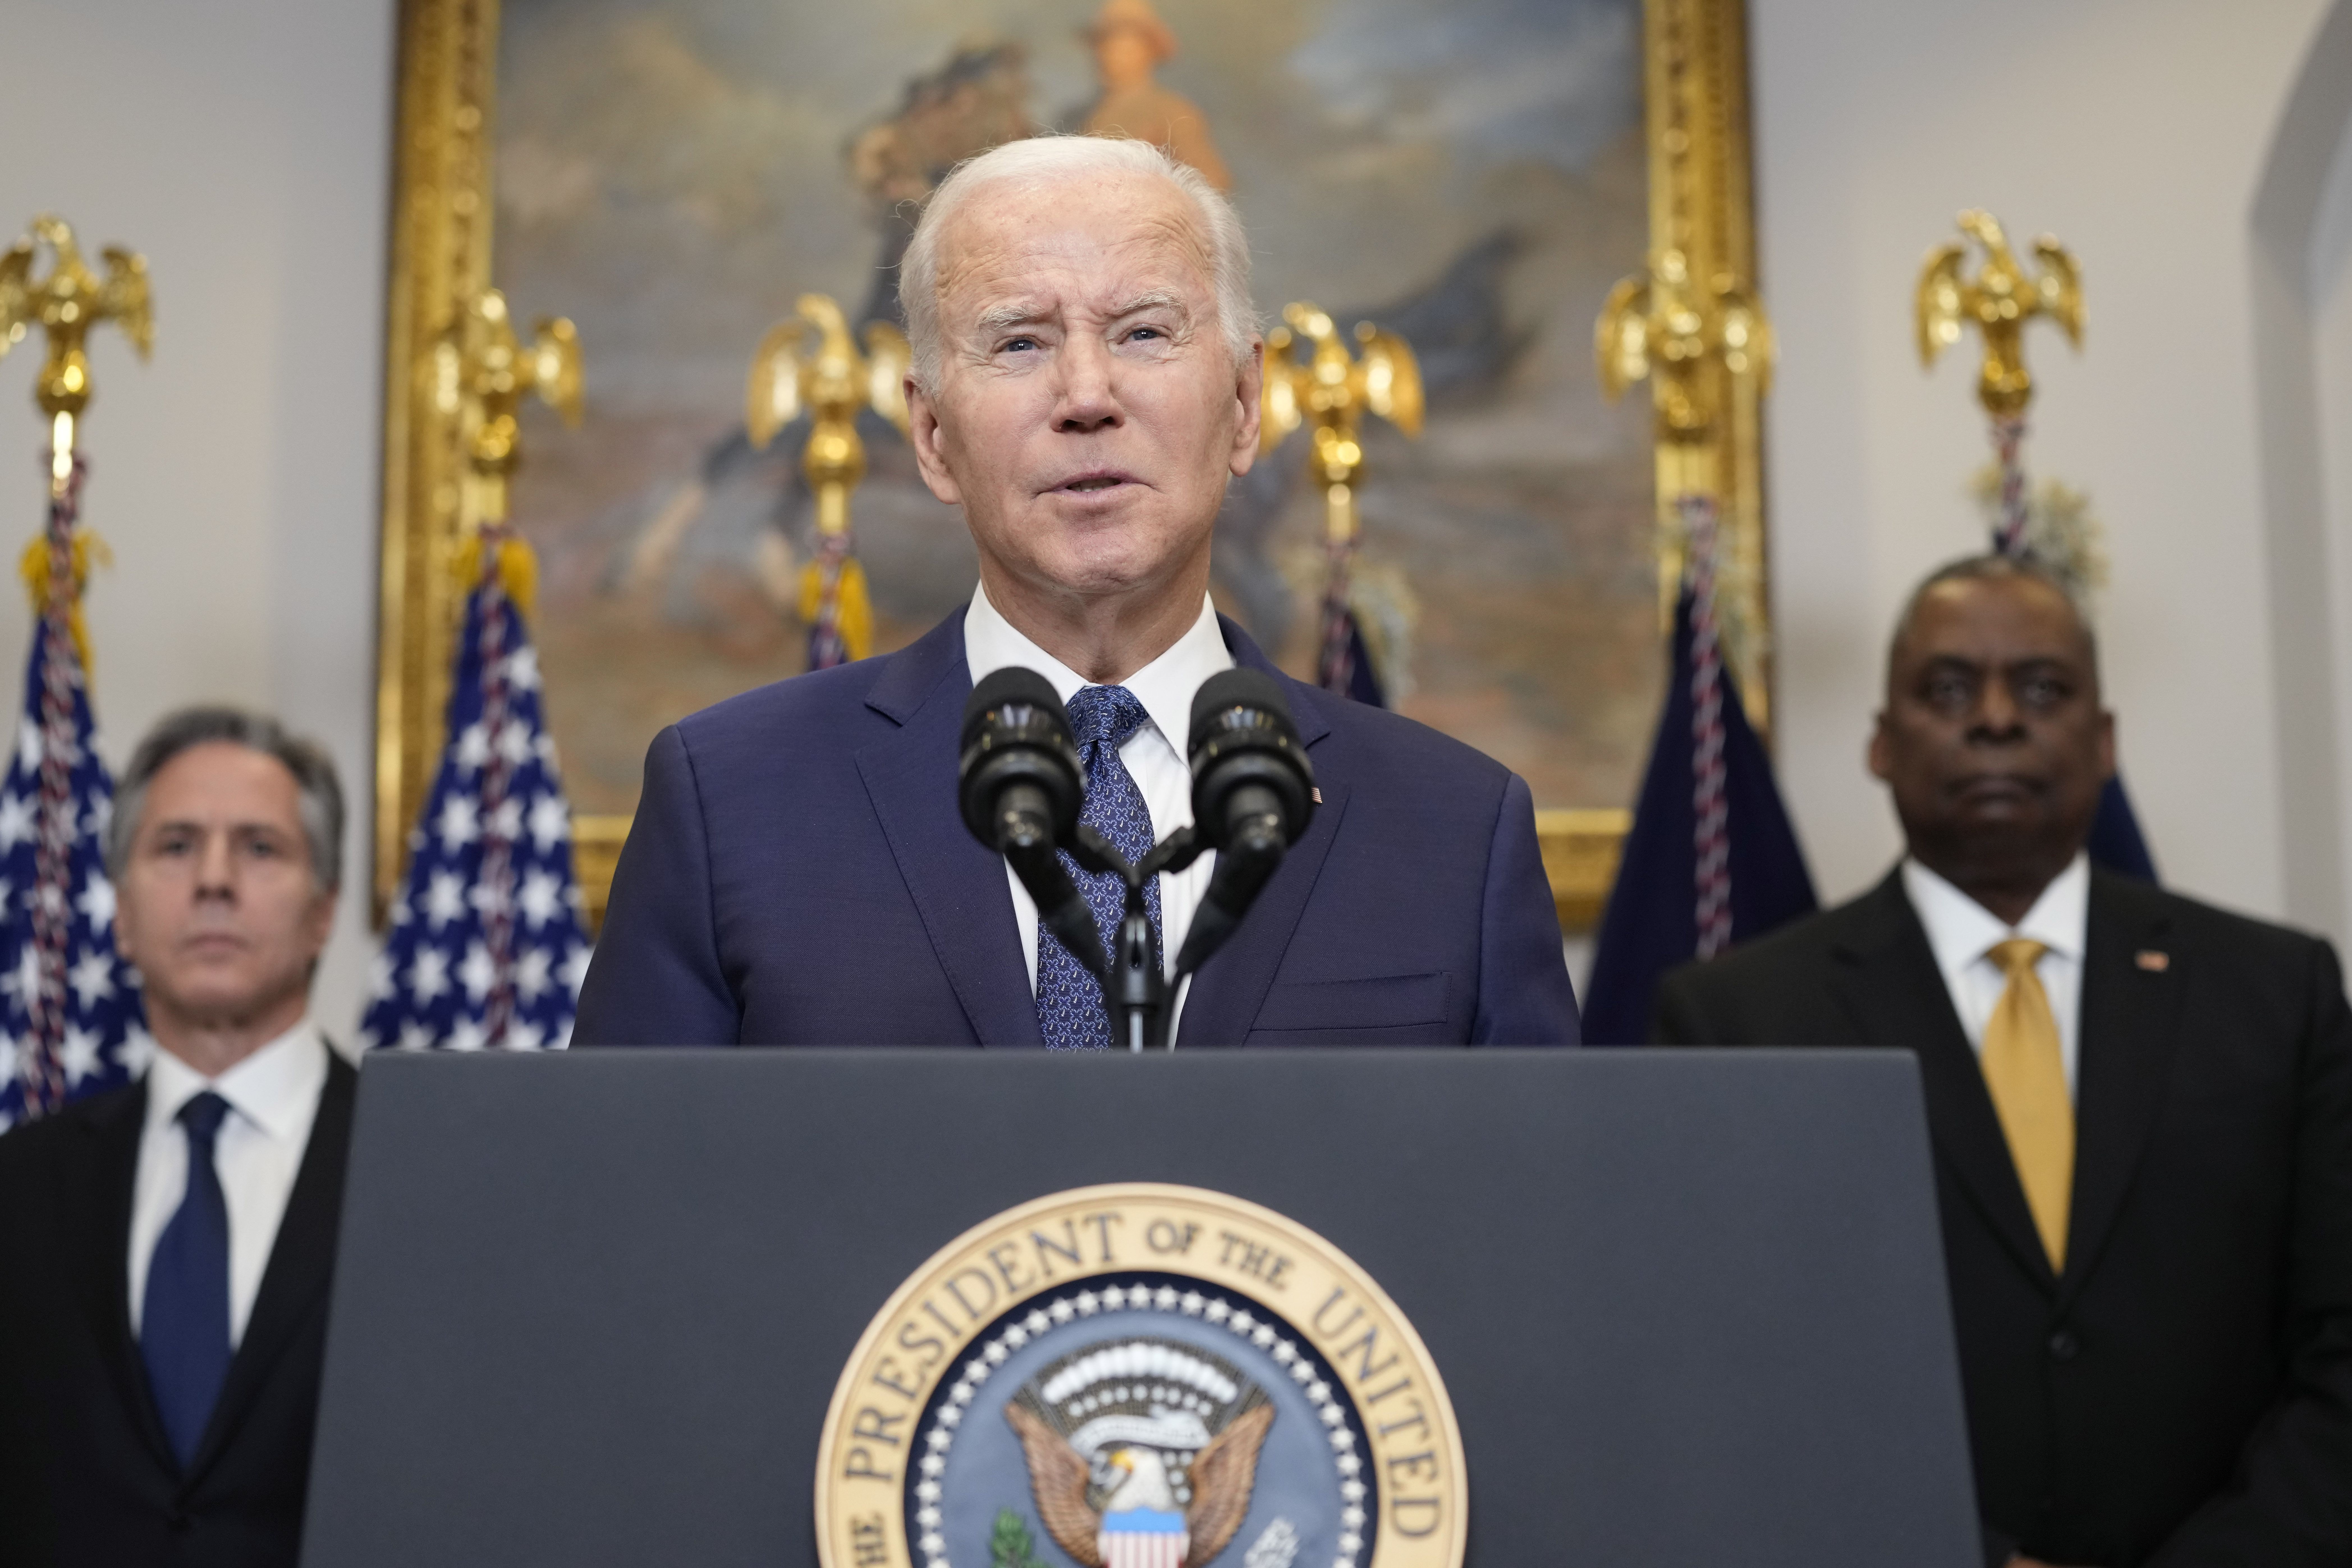 Biden is in the eye of the hurricane after it became known that he irregularly kept a series of classified papers at his home and in his office when he was vice president (2009-2017) of Barack Obama.  (AP)